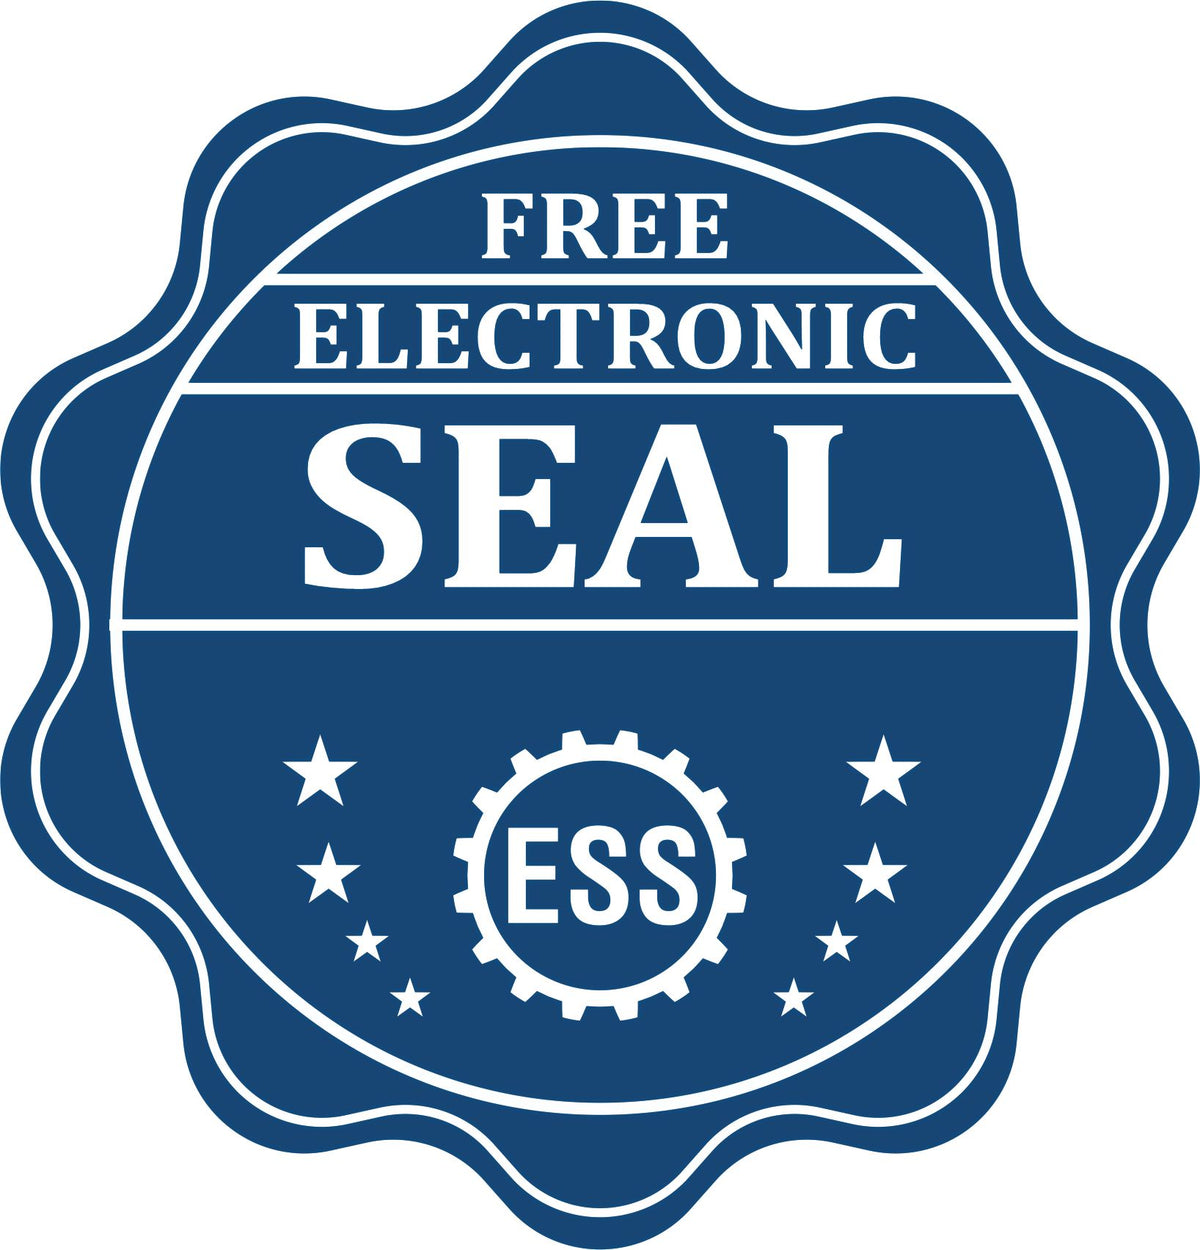 A badge showing a free electronic seal for the Slim Pre-Inked Rectangular Notary Stamp for Wyoming with stars and the ESS gear on the emblem.